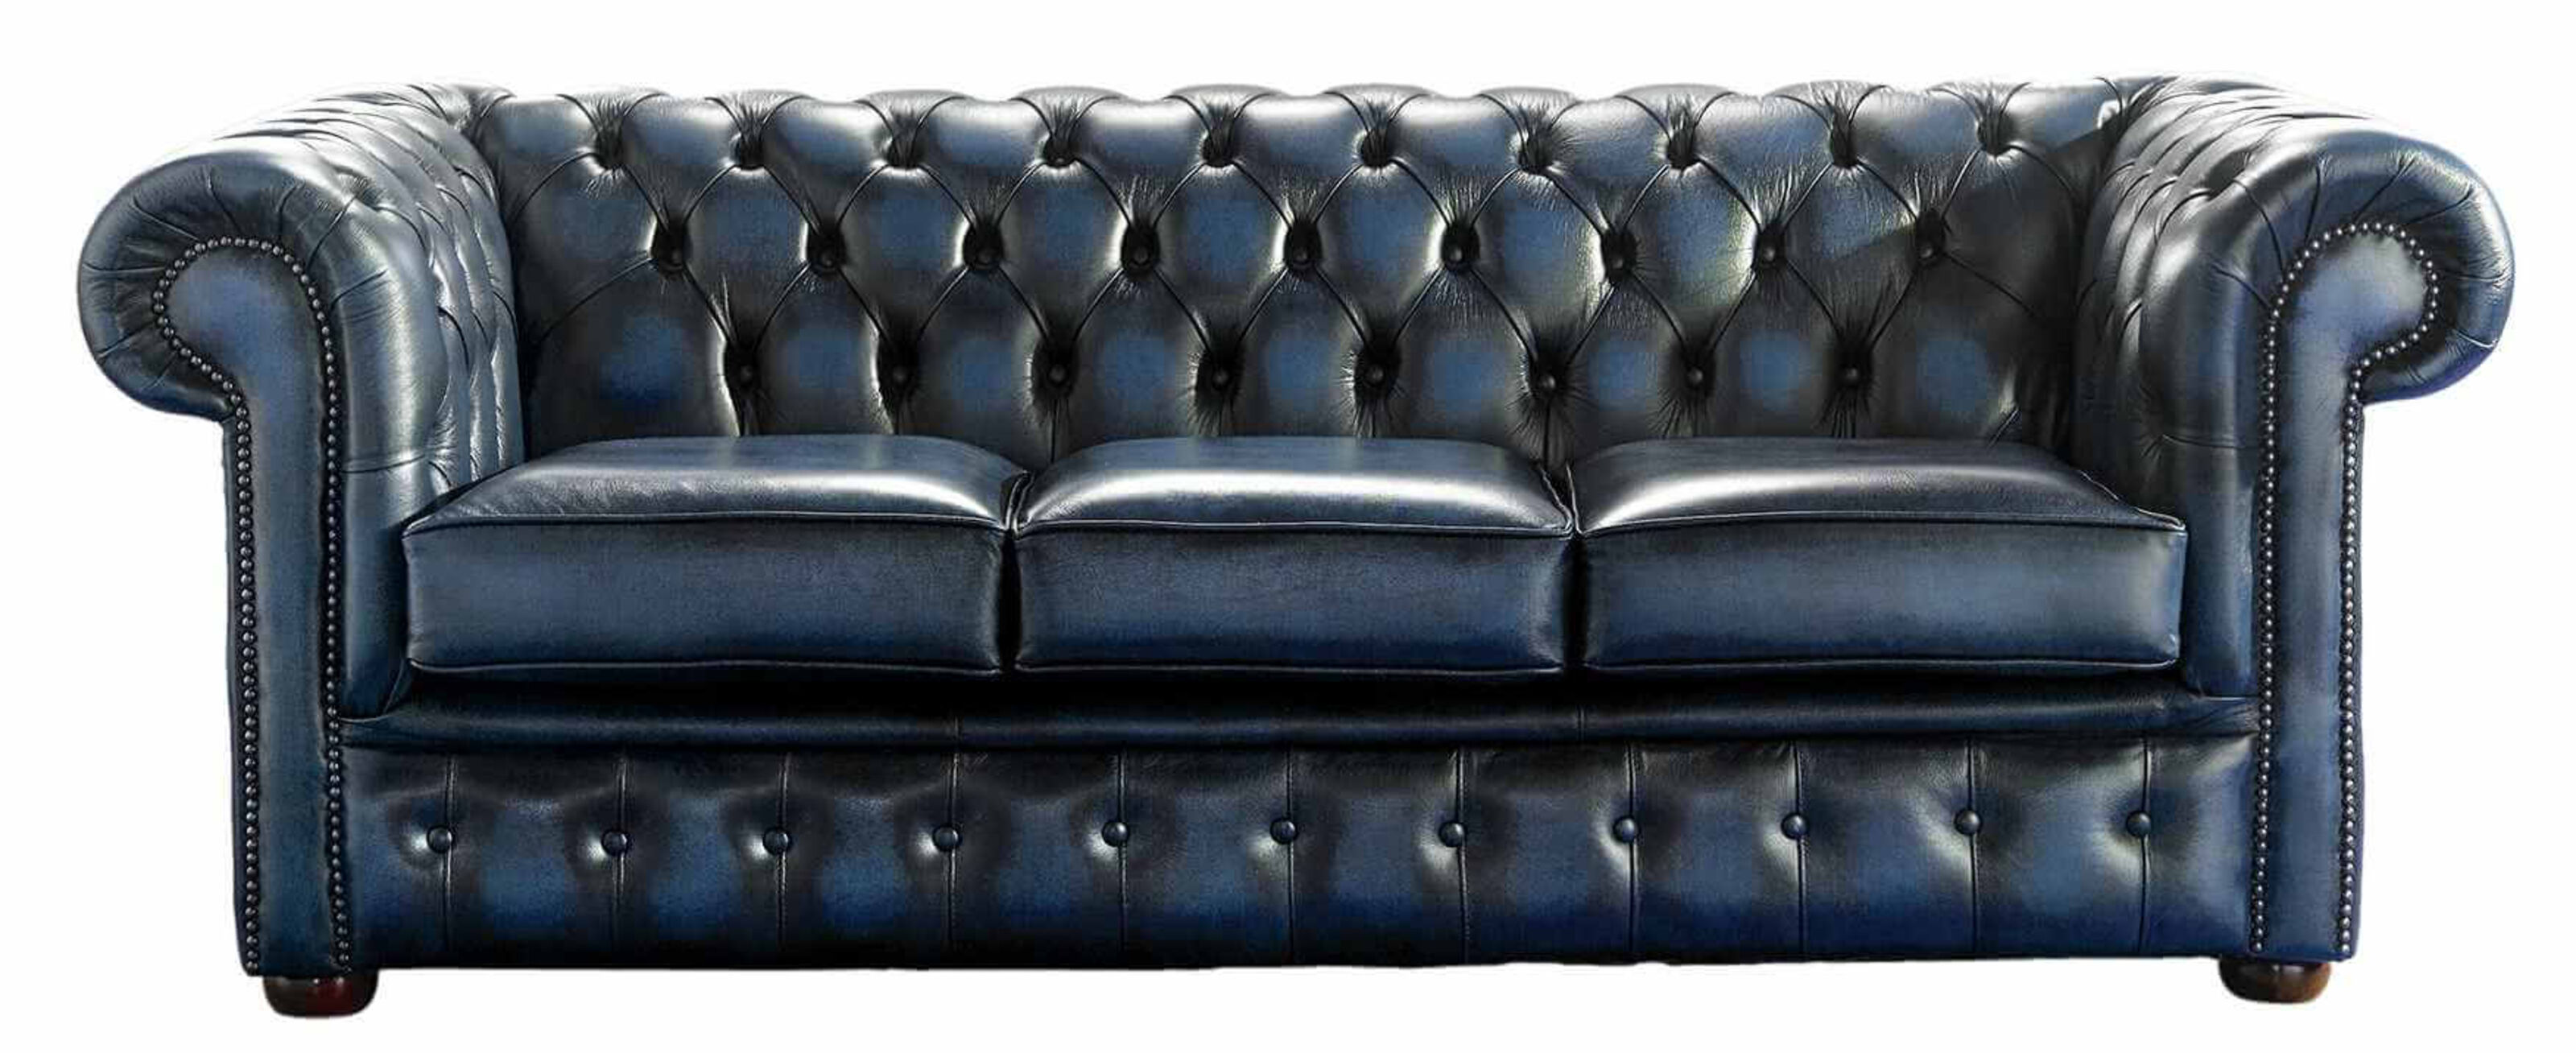 Why You Should Consider Leather Sofas for Your Home  %Post Title